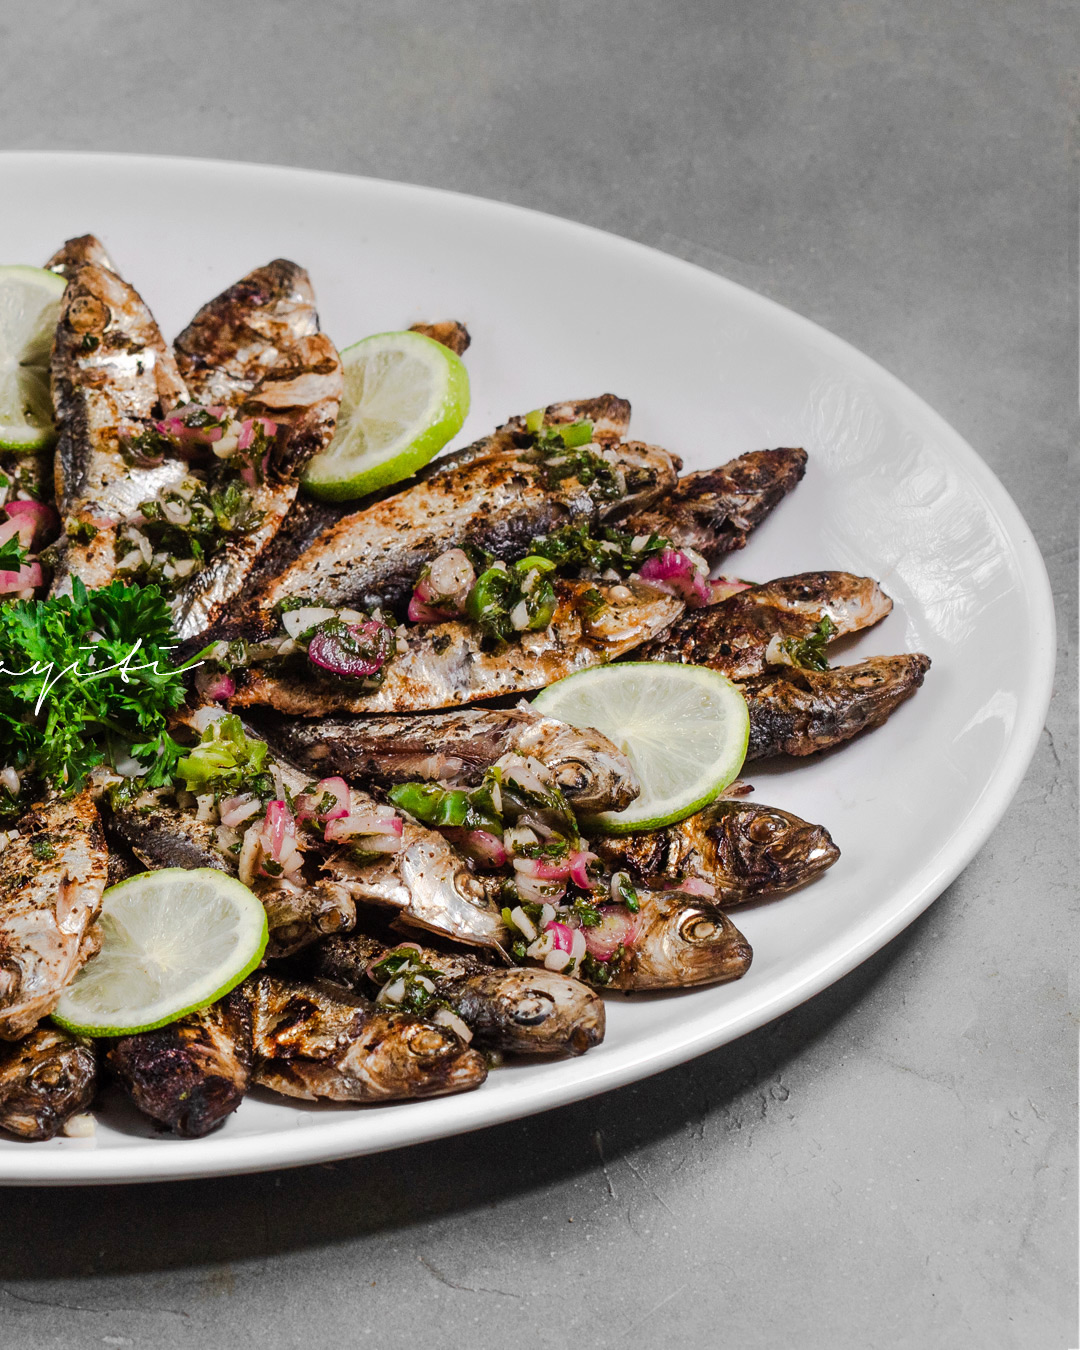 Grilled sardines with zesty hot lime habanero sauce